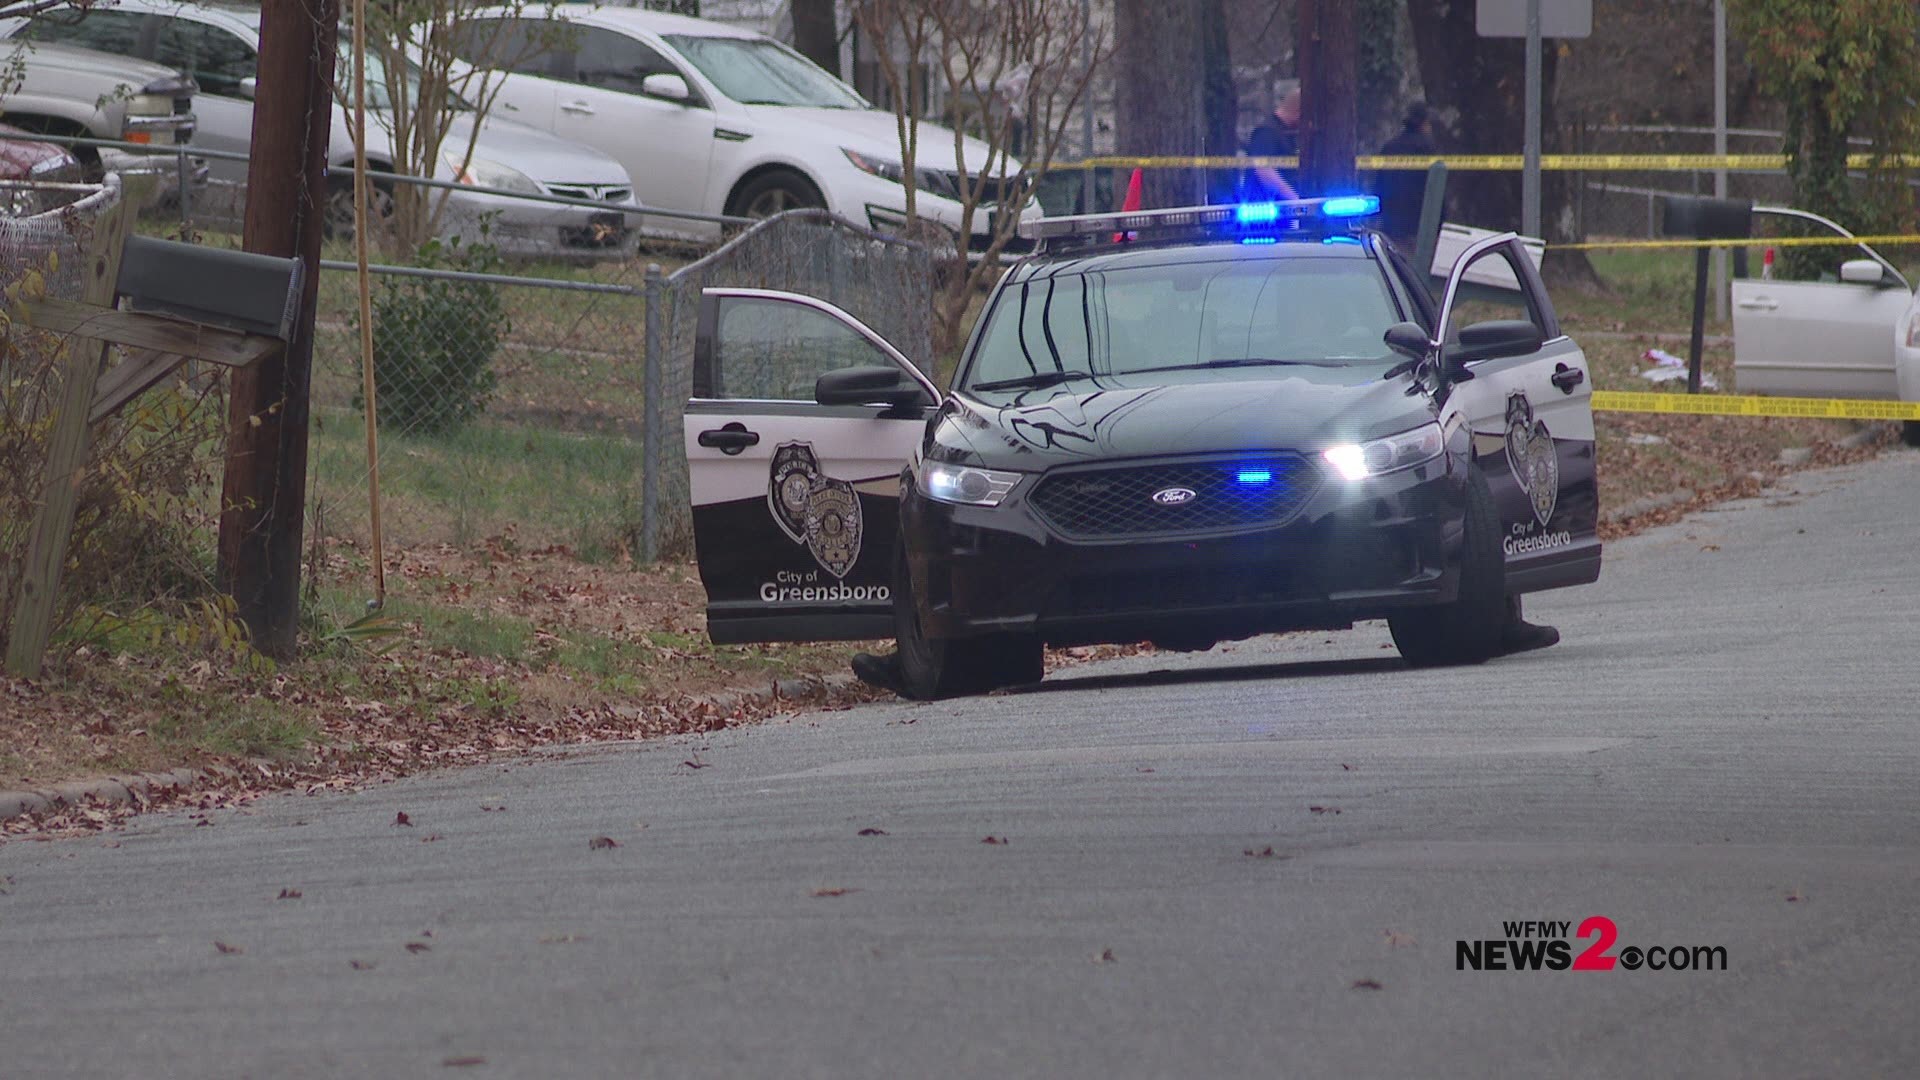 Police in Greensboro are investigating a shooting after finding a person with a gunshot wound inside a car Friday afternoon.